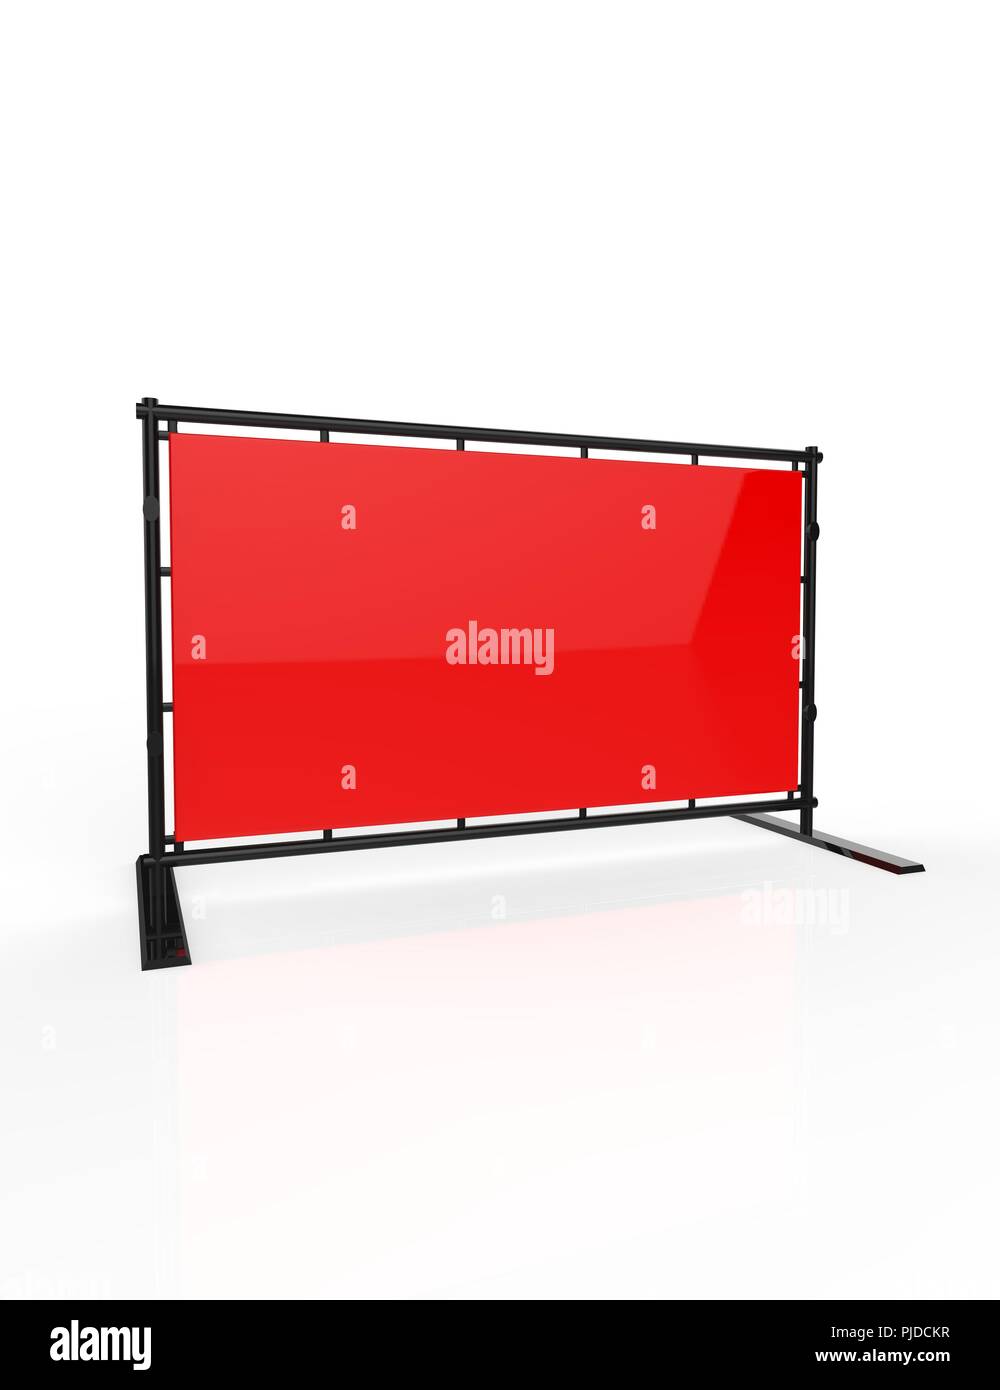 Backdrop Stand For Banners isolated on white background . 3d illustration Stock Photo